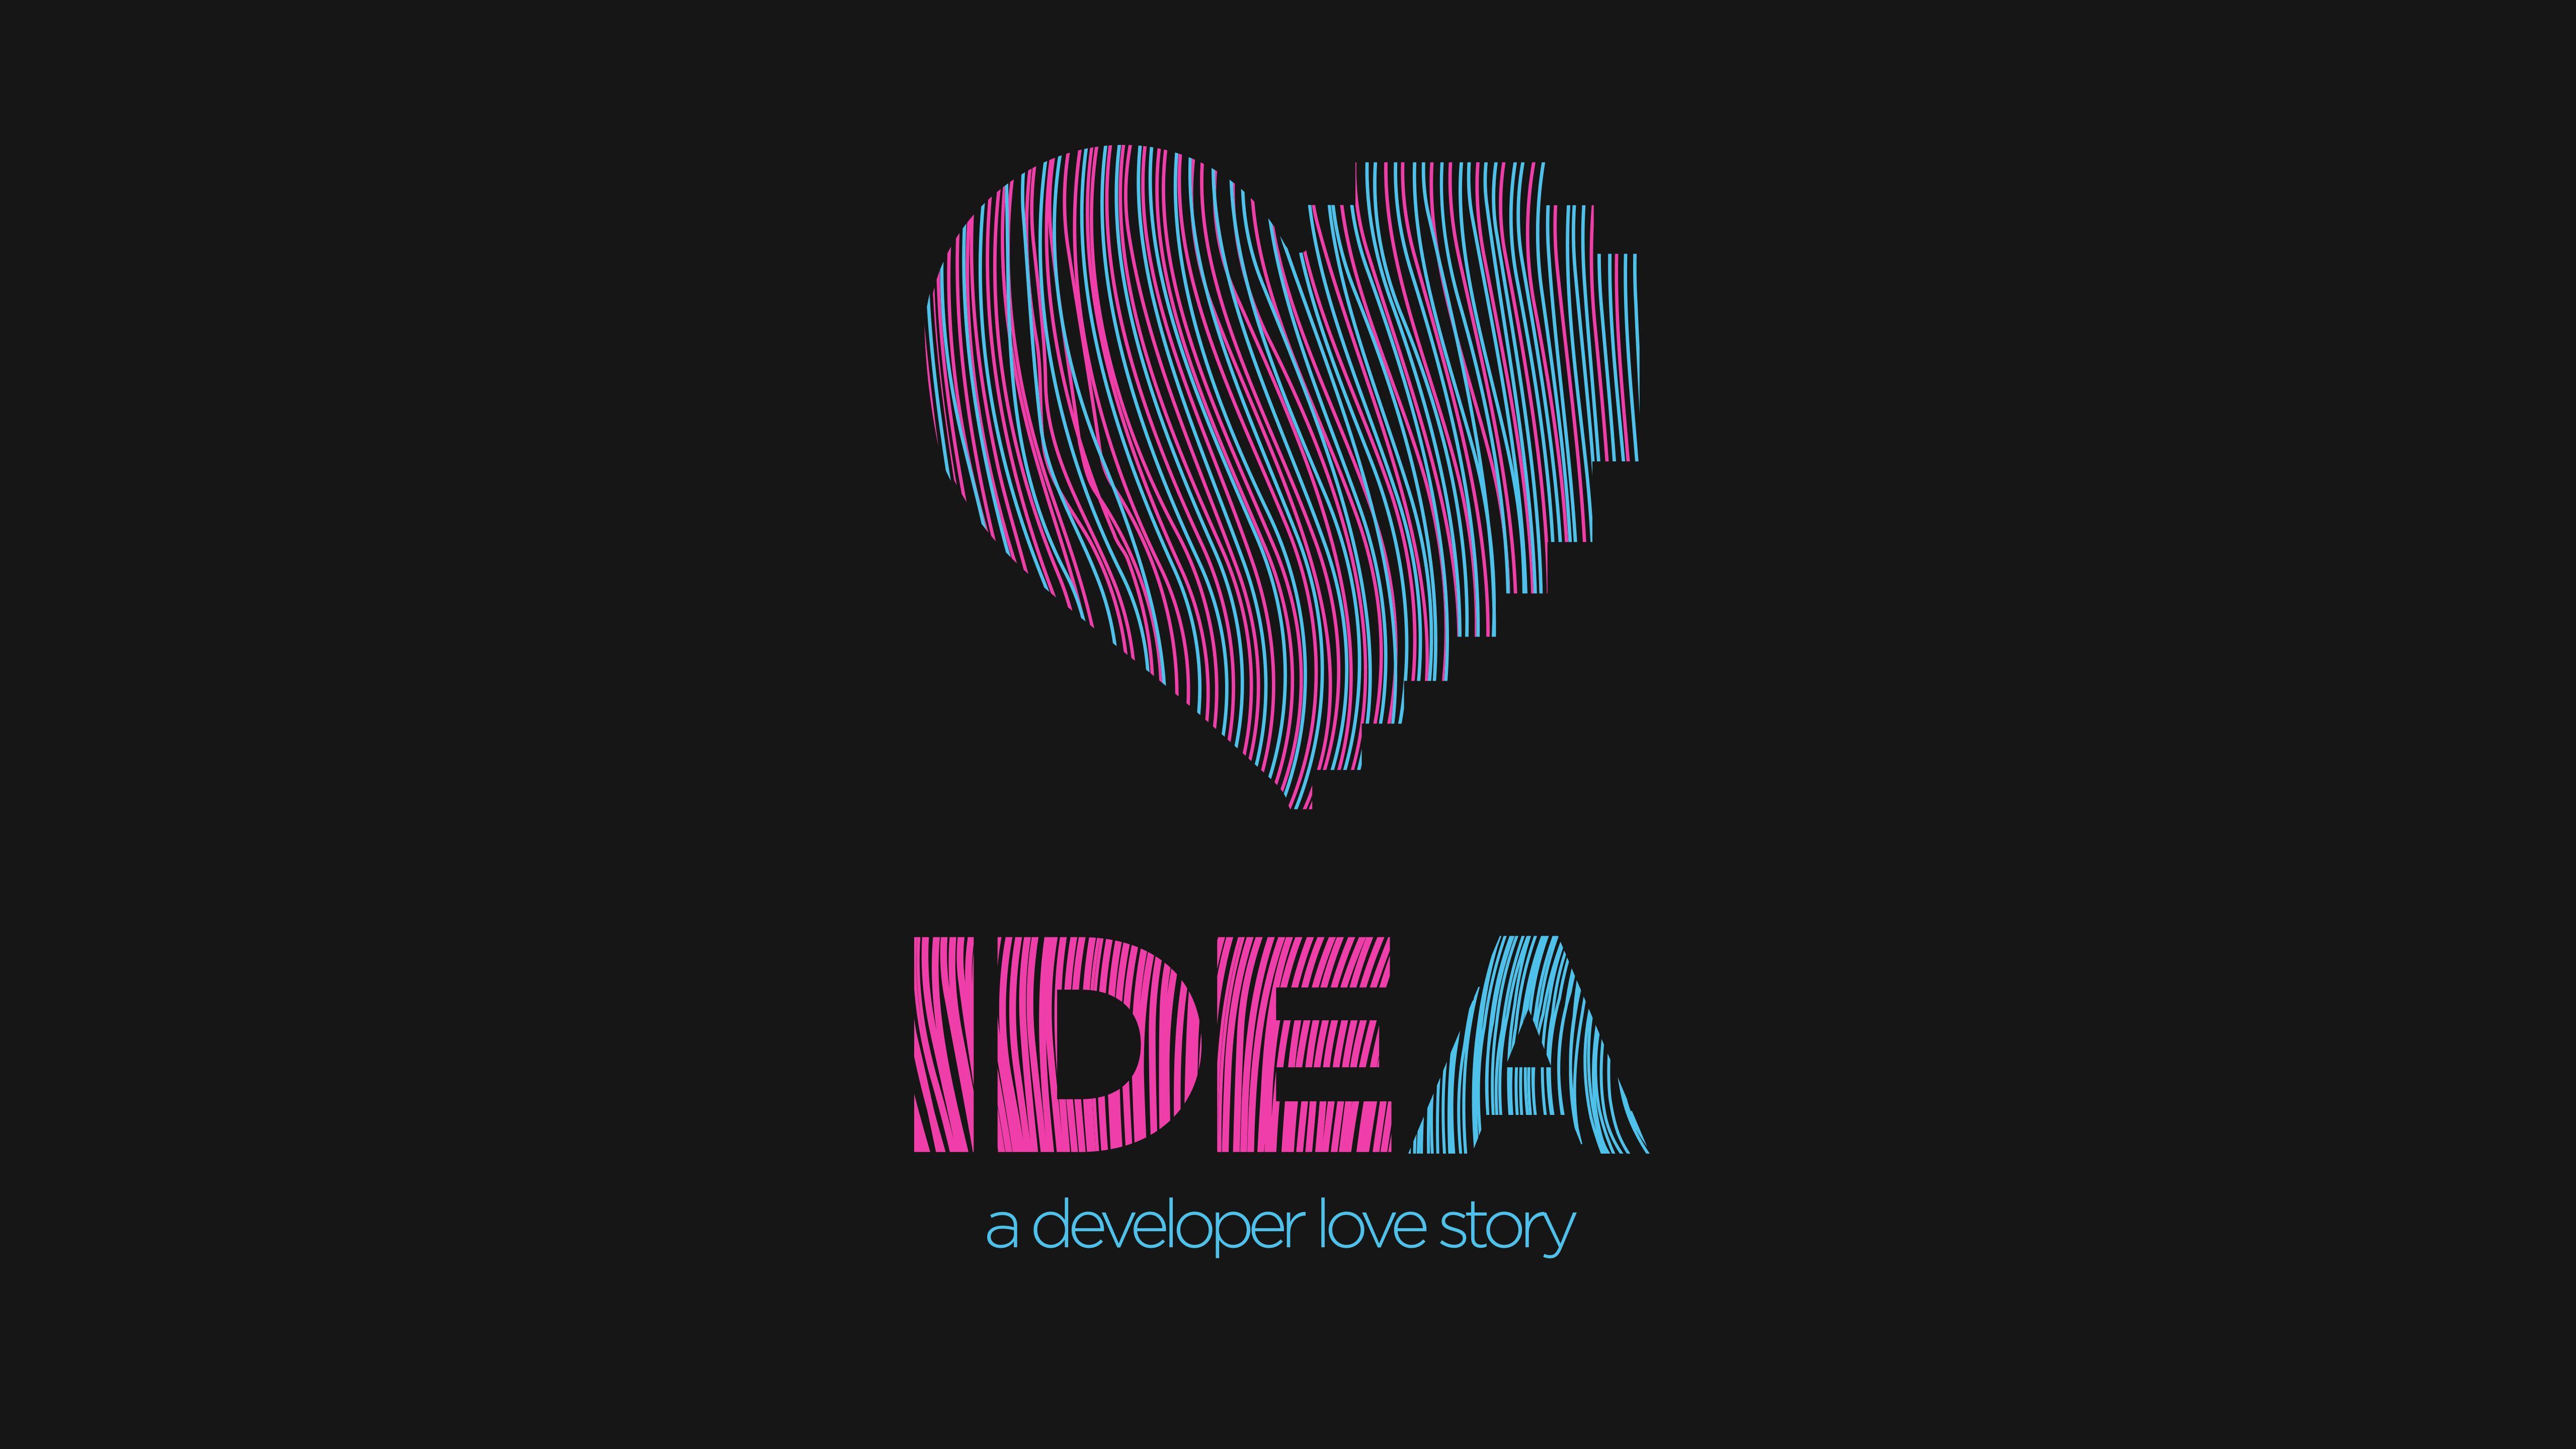 IntelliJ IDEA love you more with every new line